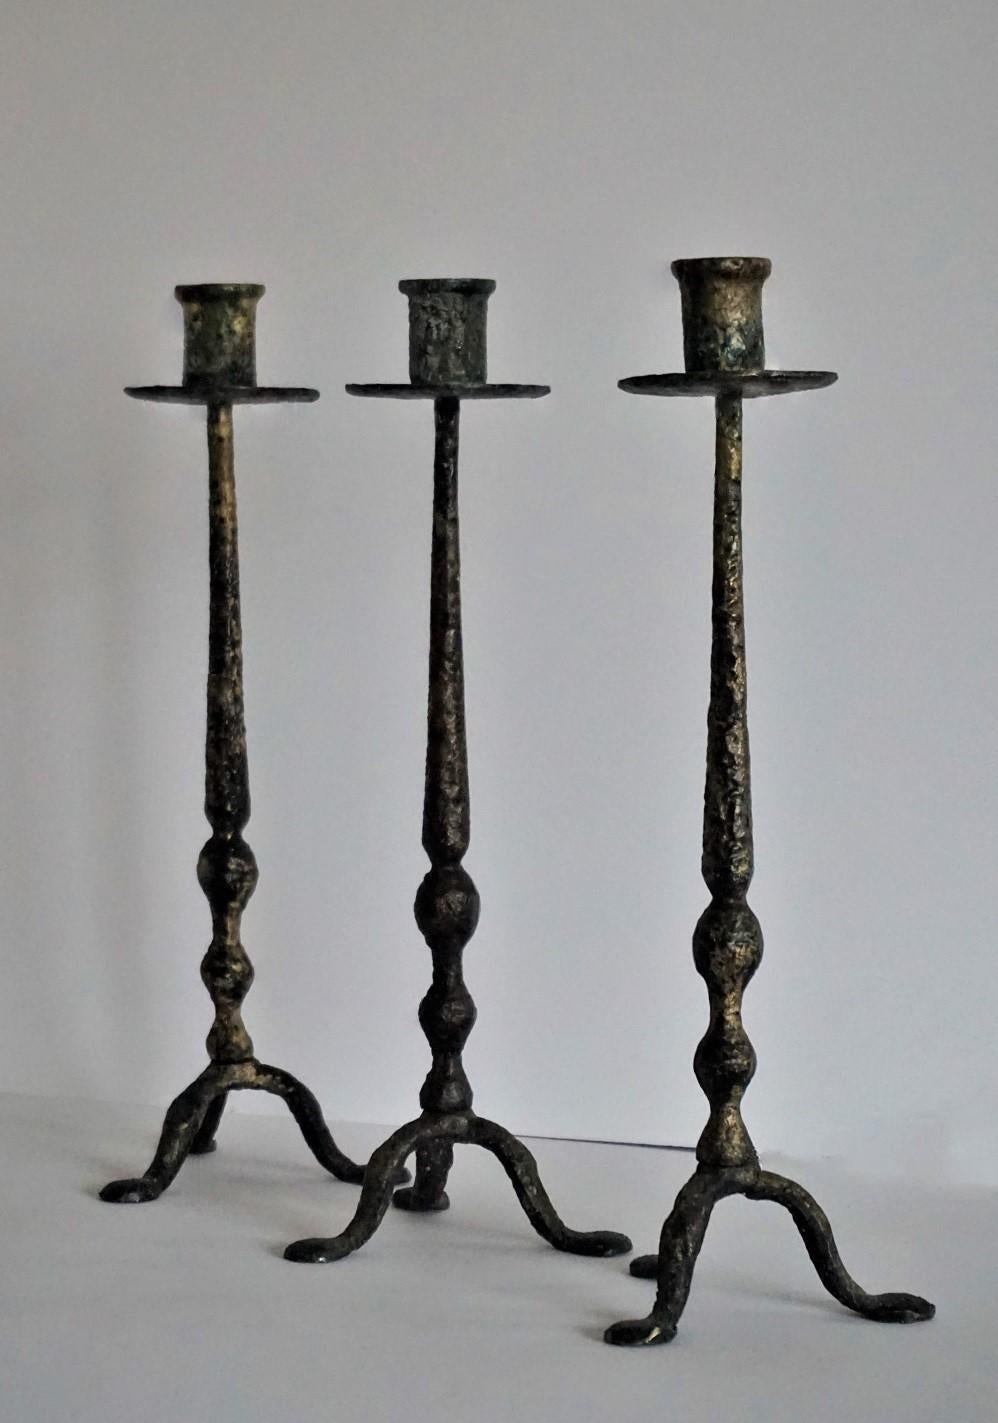 Set of three craft hand forged iron and bronze altar torchères or candleholders, France 18th century. All three candlesticks are in good condition, still with remained melted wax.
Dimensions:
H 15 inches / W 5.12 inches / D 5.12 inches
H 38 cm /